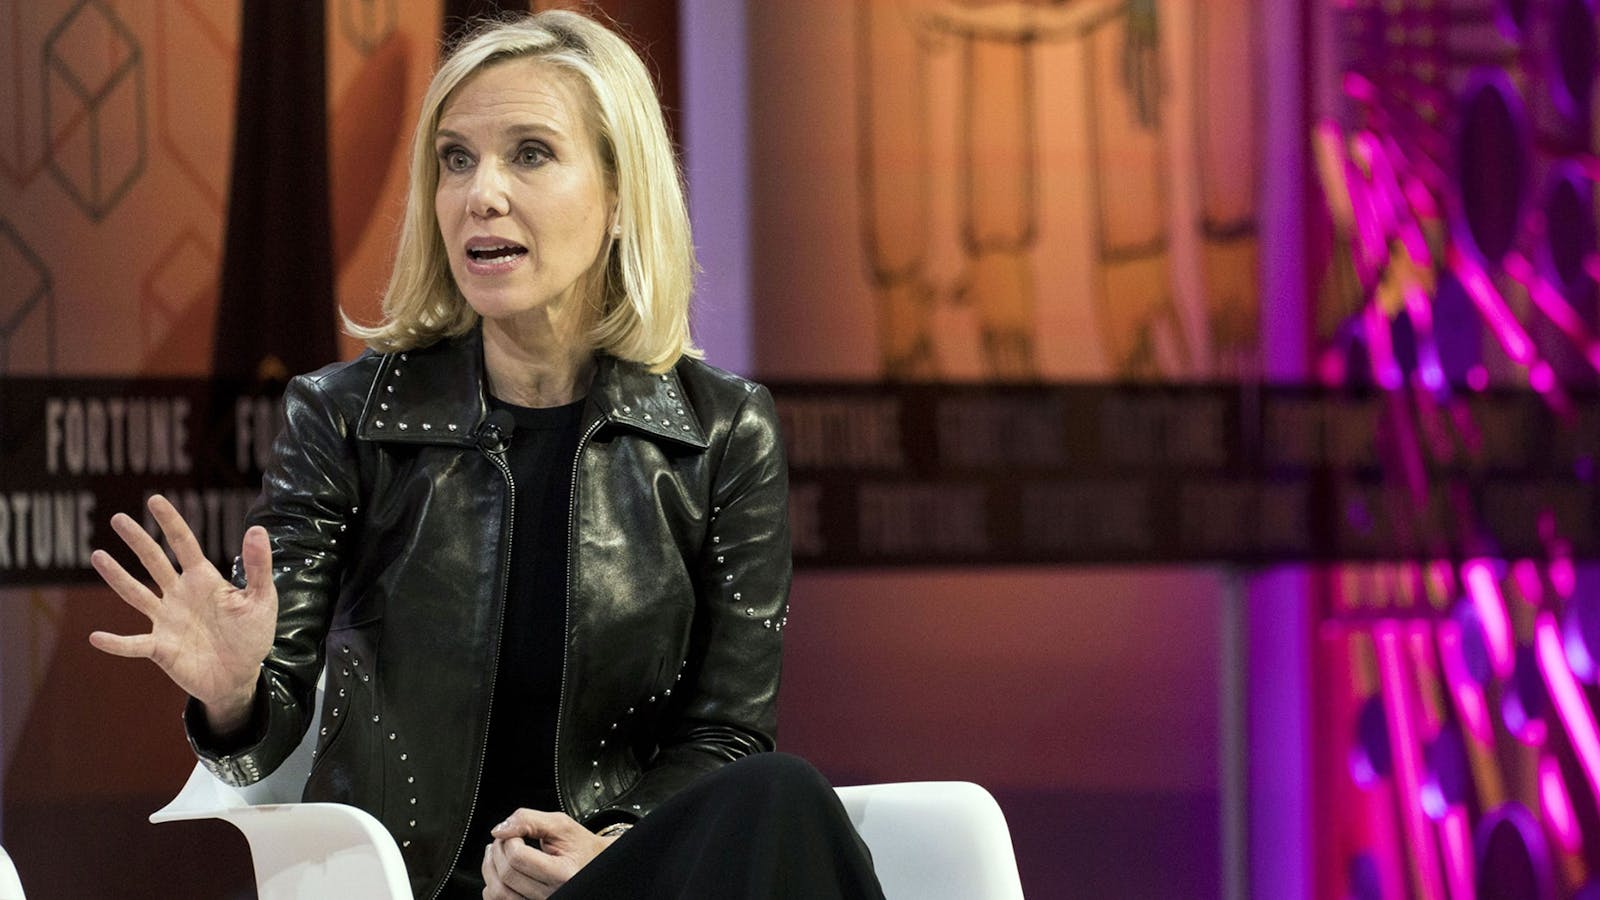 Marne Levine. Photo by Bloomberg